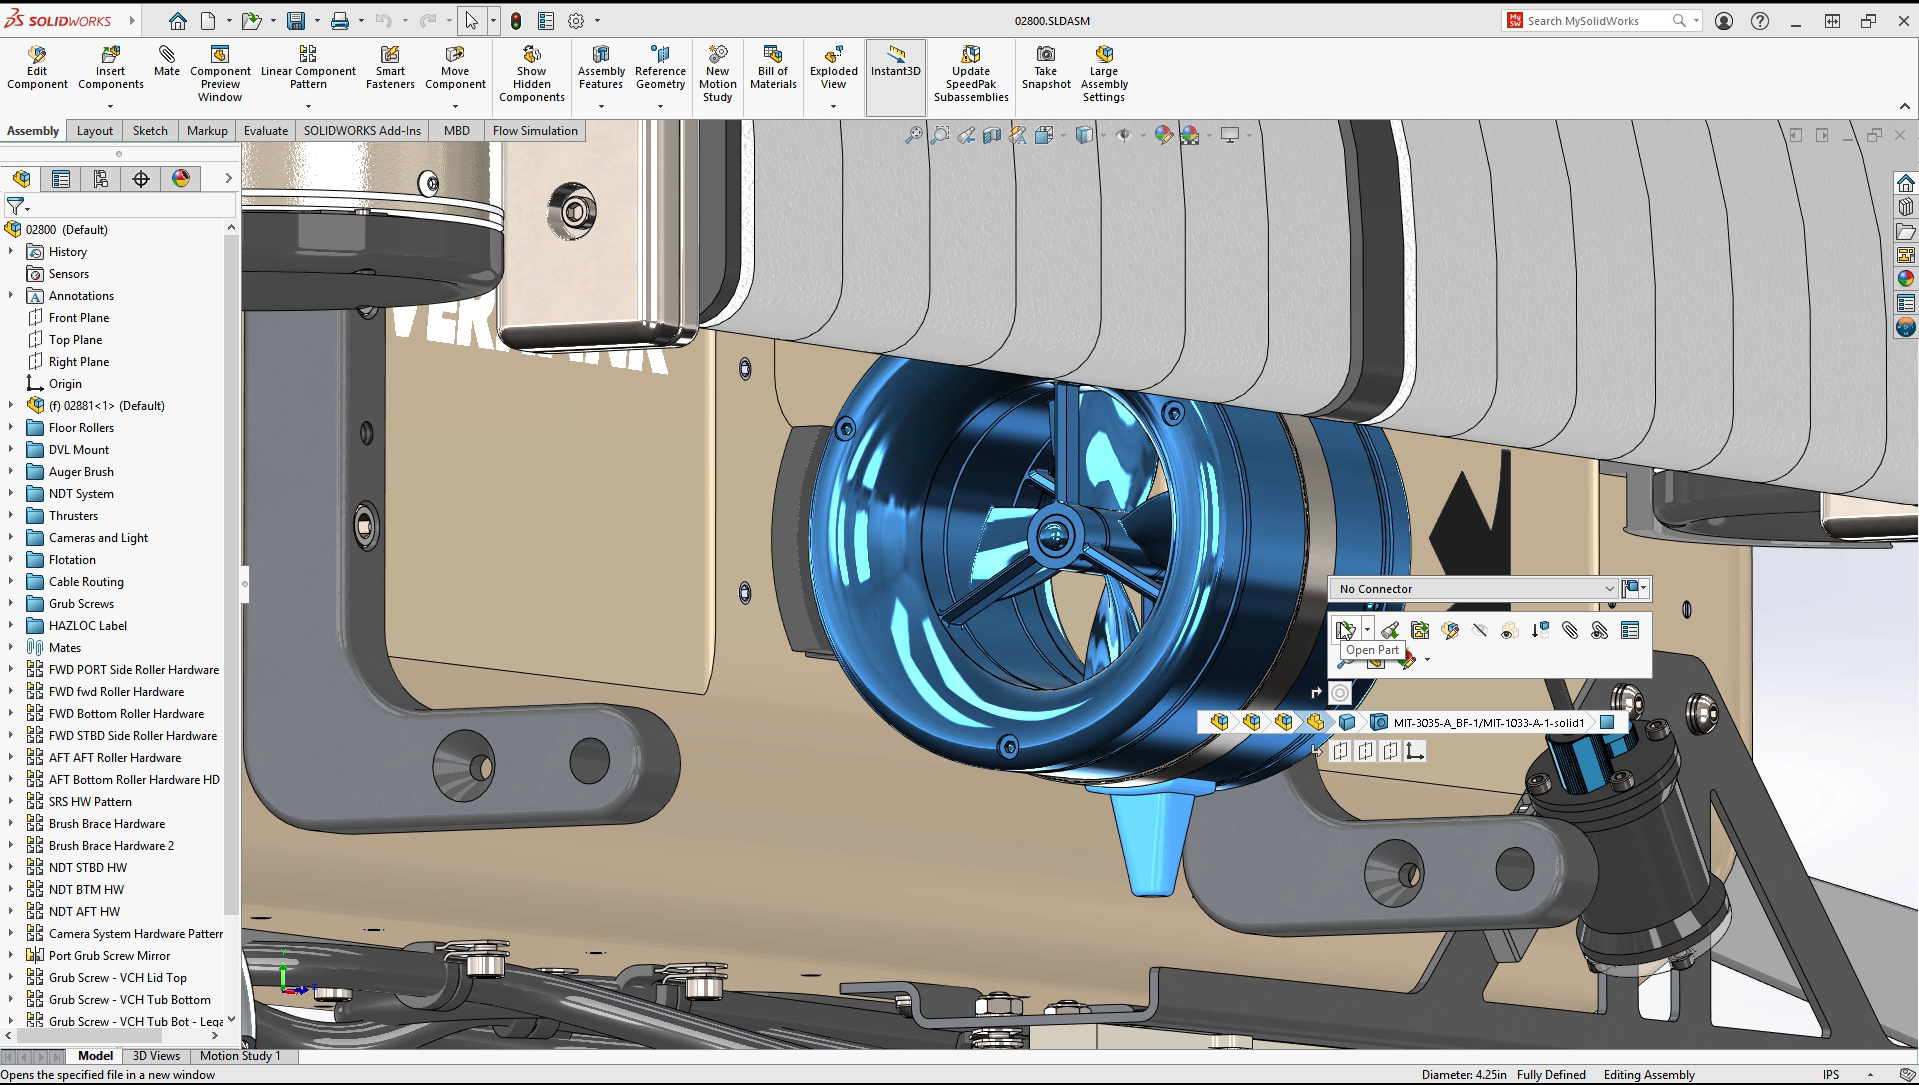 solidworks flow simulation training course for free